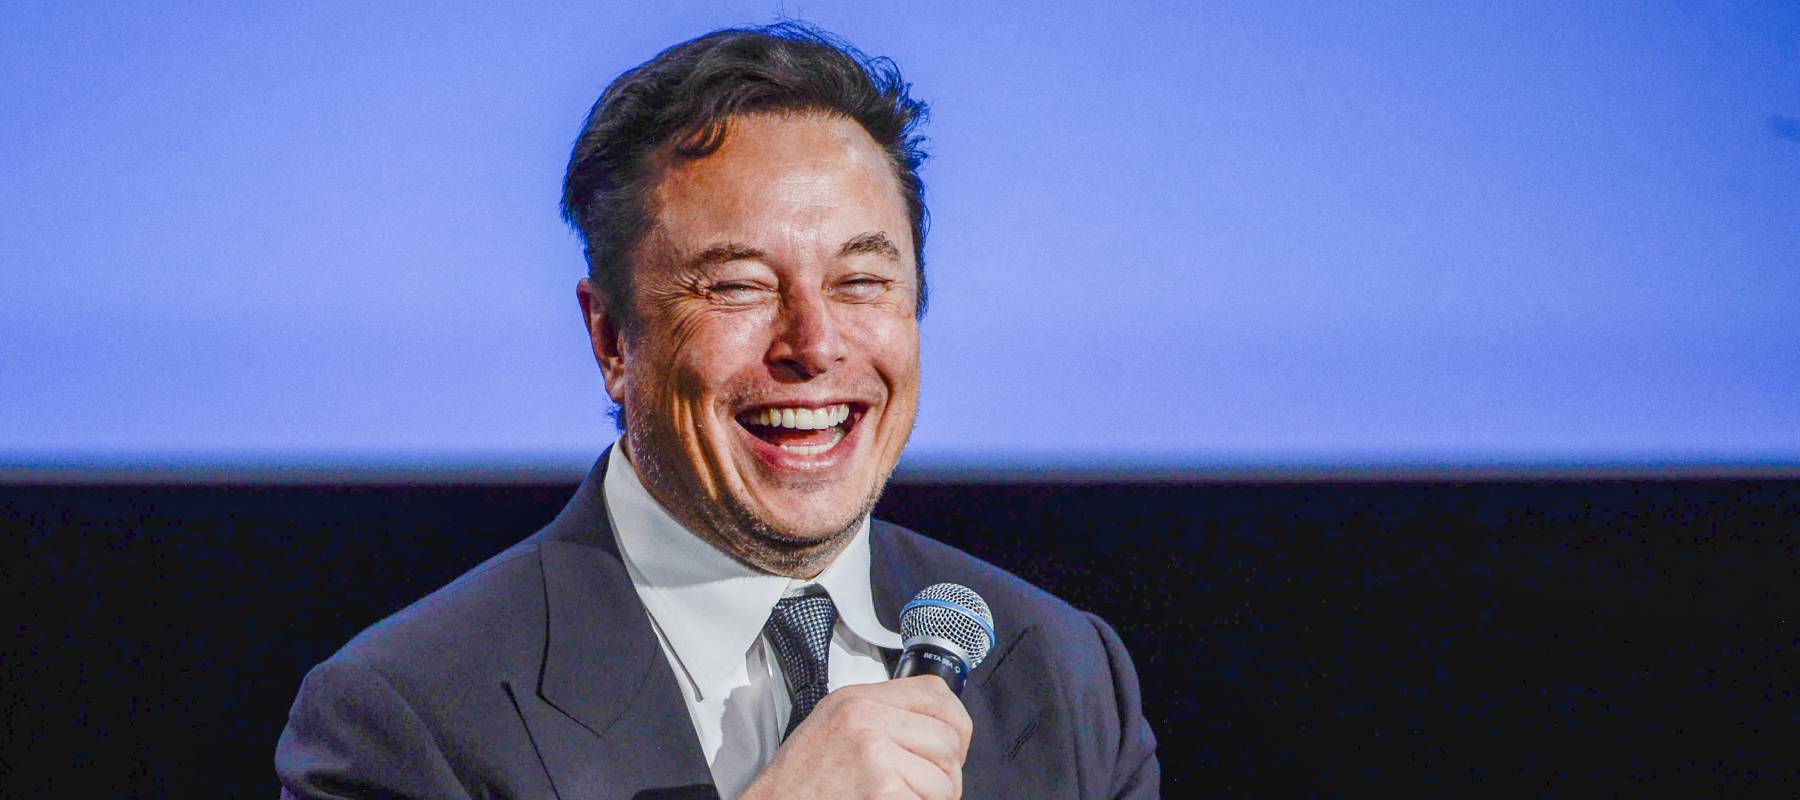 Tesla CEO Elon Musk smiles as he addresses guests at the Offshore Northern Seas 2022 meeting in Stavanger, Norway on August 29, 2022.